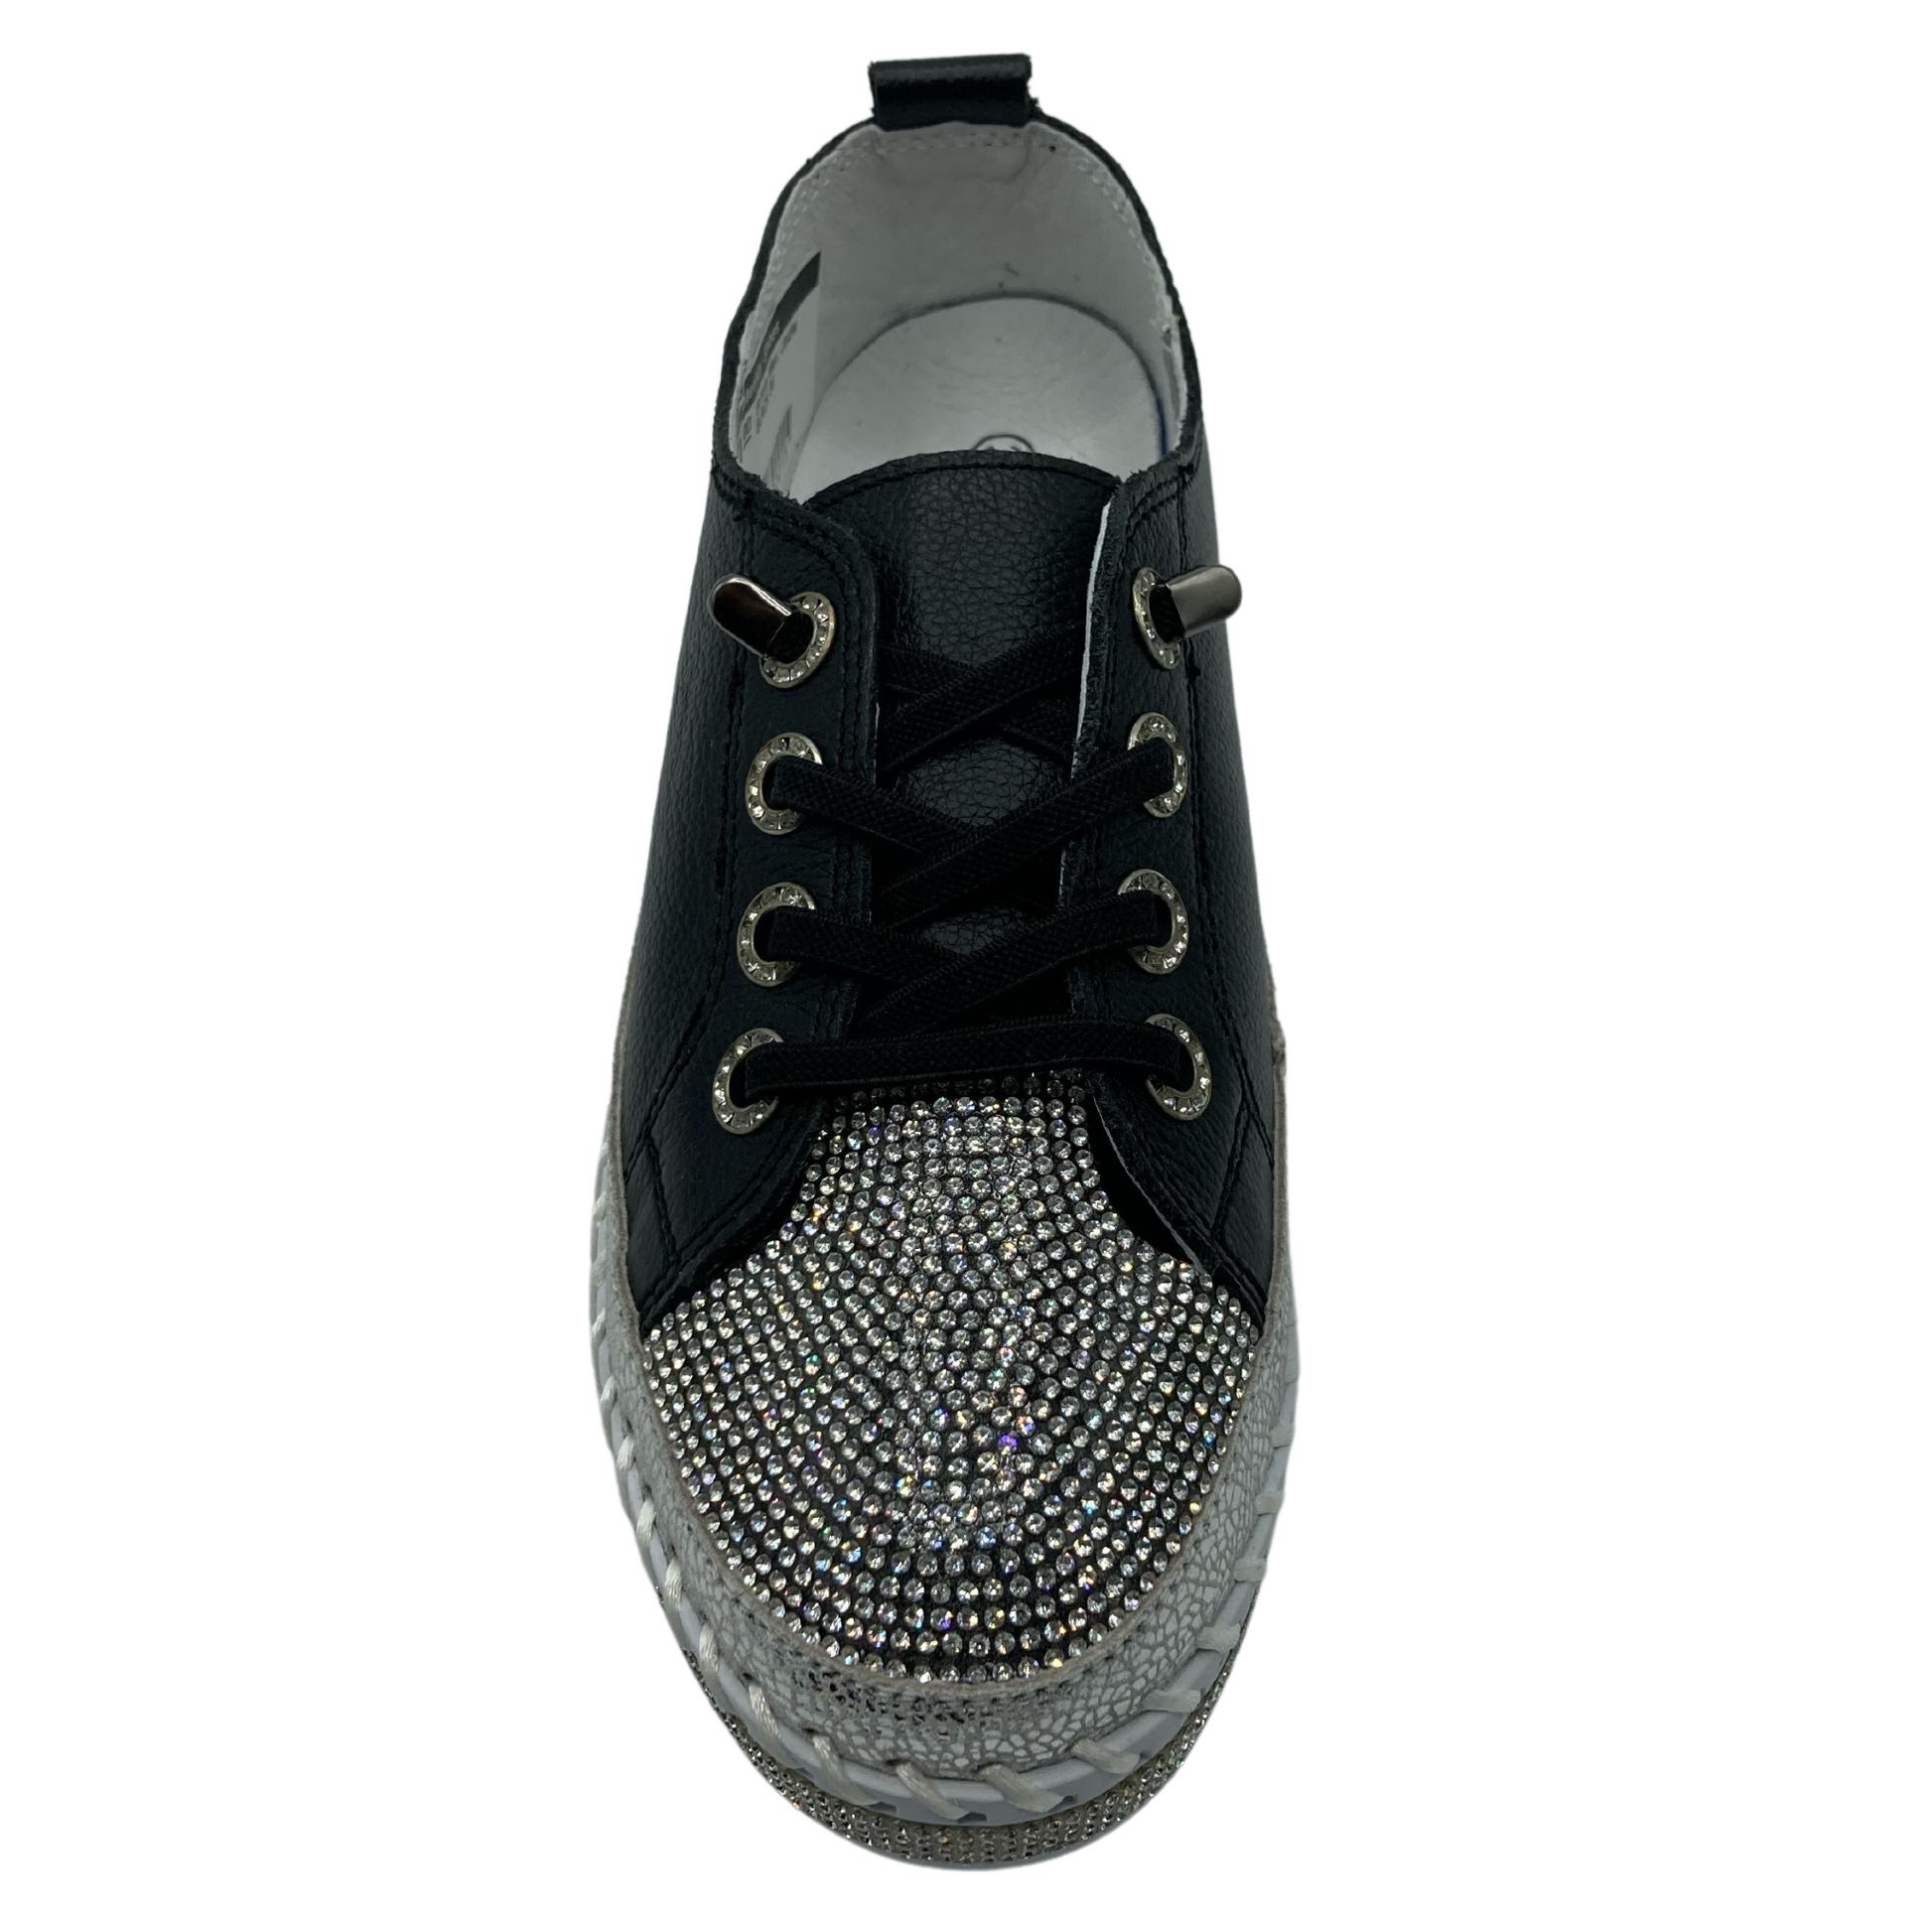 Top view of bejewelled sneaker with black laces and black leather upper